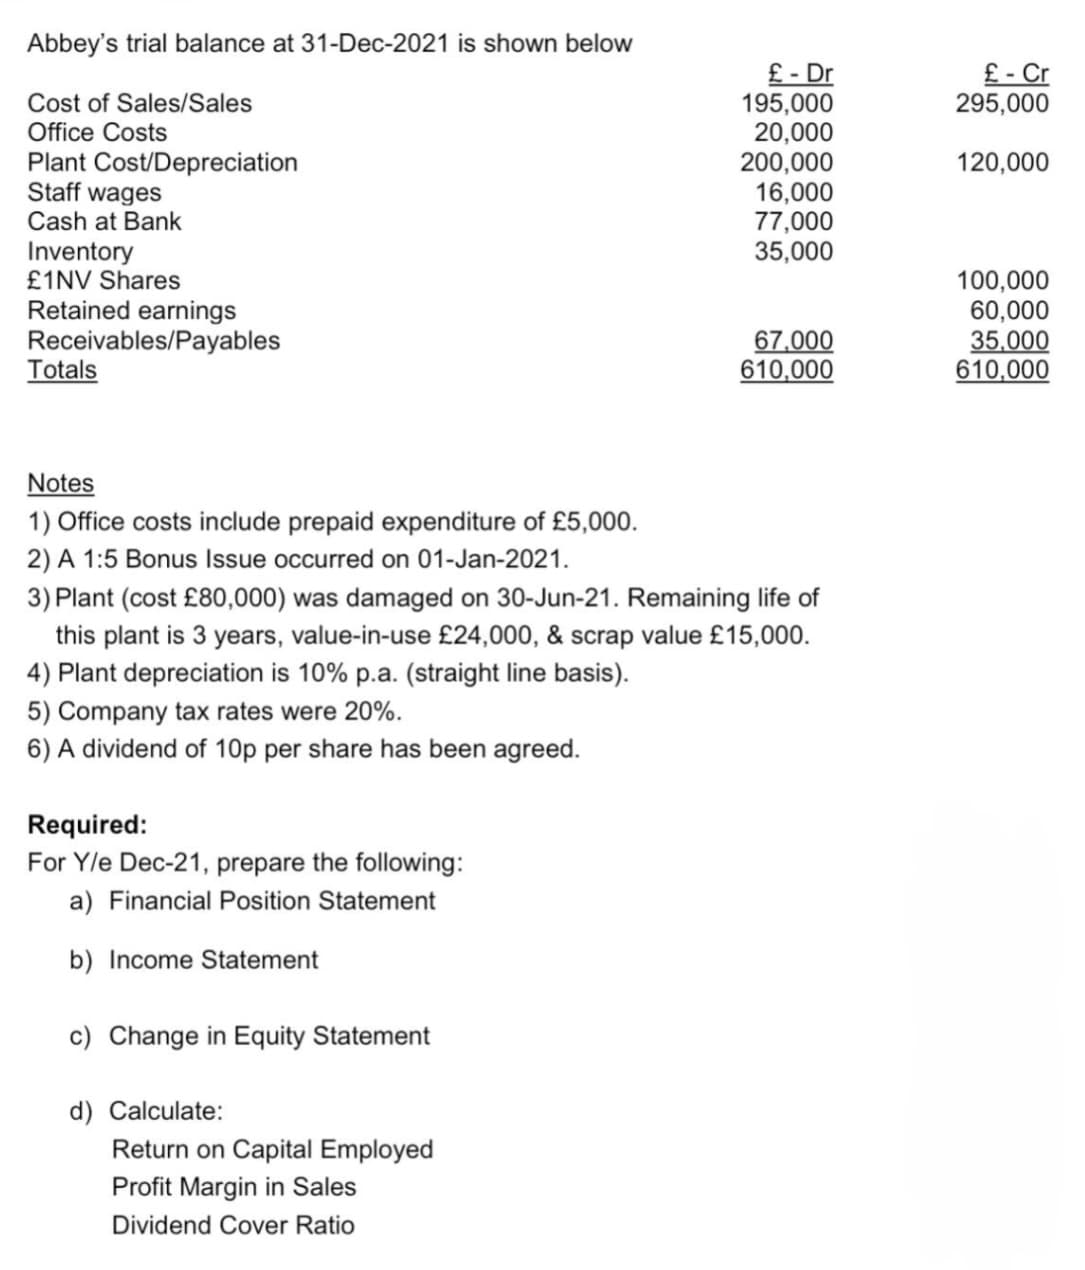 Abbey's trial balance at 31-Dec-2021 is shown below
Cost of Sales/Sales
Office Costs
Plant Cost/Depreciation
Staff wages
Cash at Bank
Inventory
£1NV Shares
Retained earnings
Receivables/Payables
Totals
£ - Dr
195,000
20,000
£-Cr
295,000
200,000
120,000
16,000
77,000
35,000
100,000
60,000
67,000
610,000
35,000
610,000
Notes
1) Office costs include prepaid expenditure of £5,000.
2) A 1:5 Bonus Issue occurred on 01-Jan-2021.
3) Plant (cost £80,000) was damaged on 30-Jun-21. Remaining life of
this plant is 3 years, value-in-use £24,000, & scrap value £15,000.
4) Plant depreciation is 10% p.a. (straight line basis).
5) Company tax rates were 20%.
6) A dividend of 10p per share has been agreed.
Required:
For Y/e Dec-21, prepare the following:
a) Financial Position Statement
b) Income Statement
c) Change in Equity Statement
d) Calculate:
Return on Capital Employed
Profit Margin in Sales
Dividend Cover Ratio